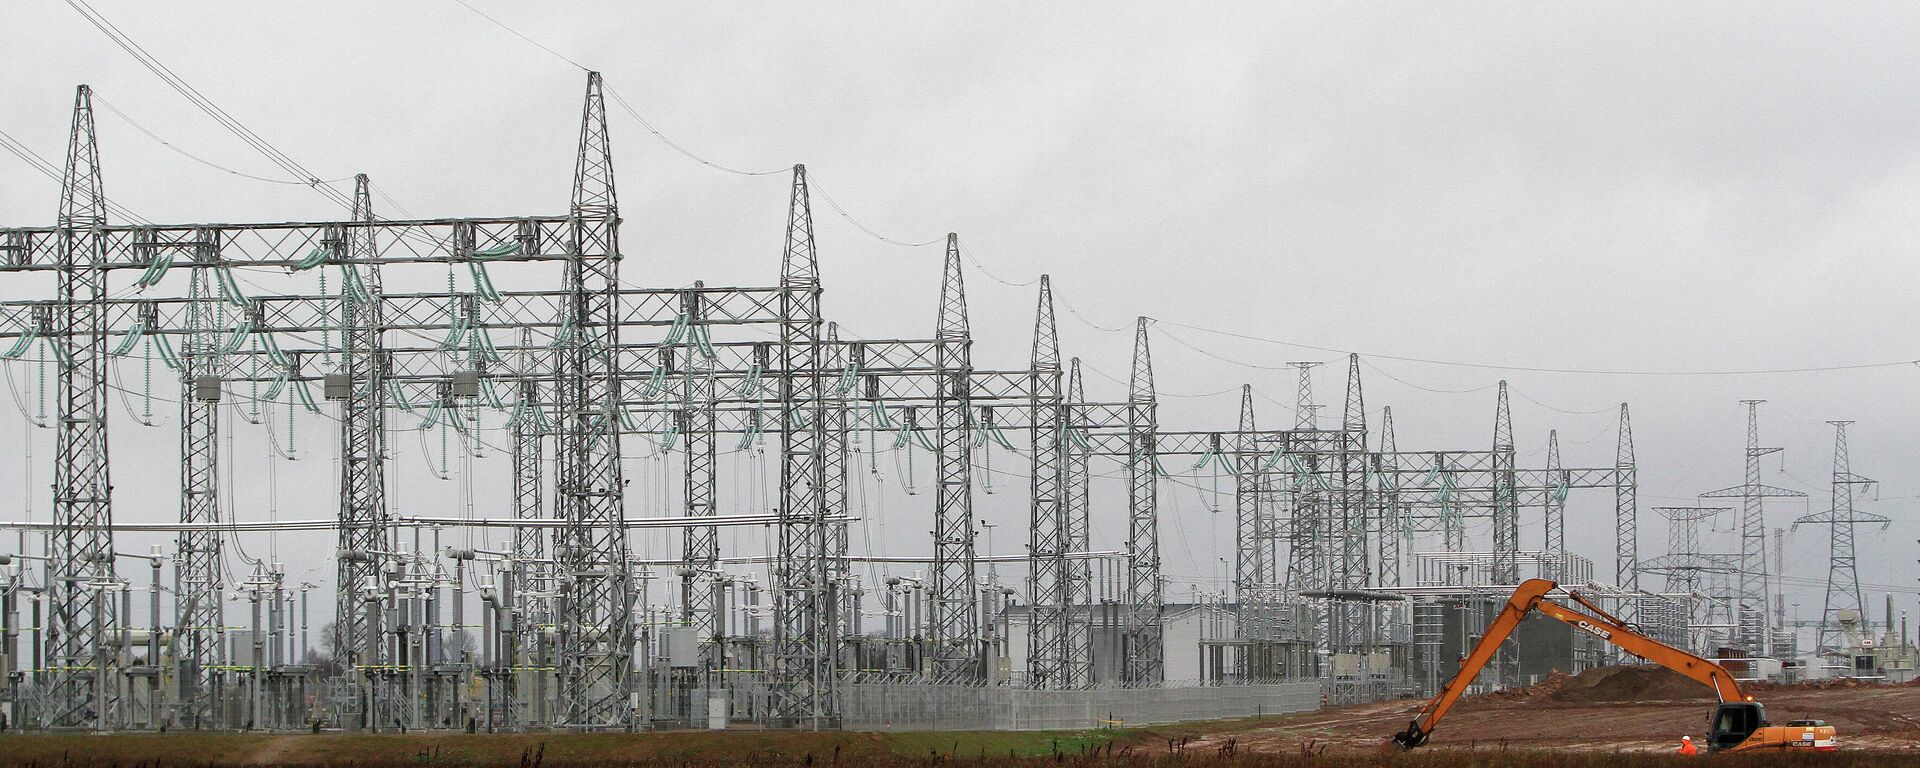 LitPol Link HVDC back-to-back converter station and  power line to Poland – LitPol Link is pictured in Alytus on November 19, 2015. Lithuania will soon begin importing electricity from fellow EU states Poland and Sweden to reduce the Baltic region's dependence on Russia - Sputnik International, 1920, 08.12.2021